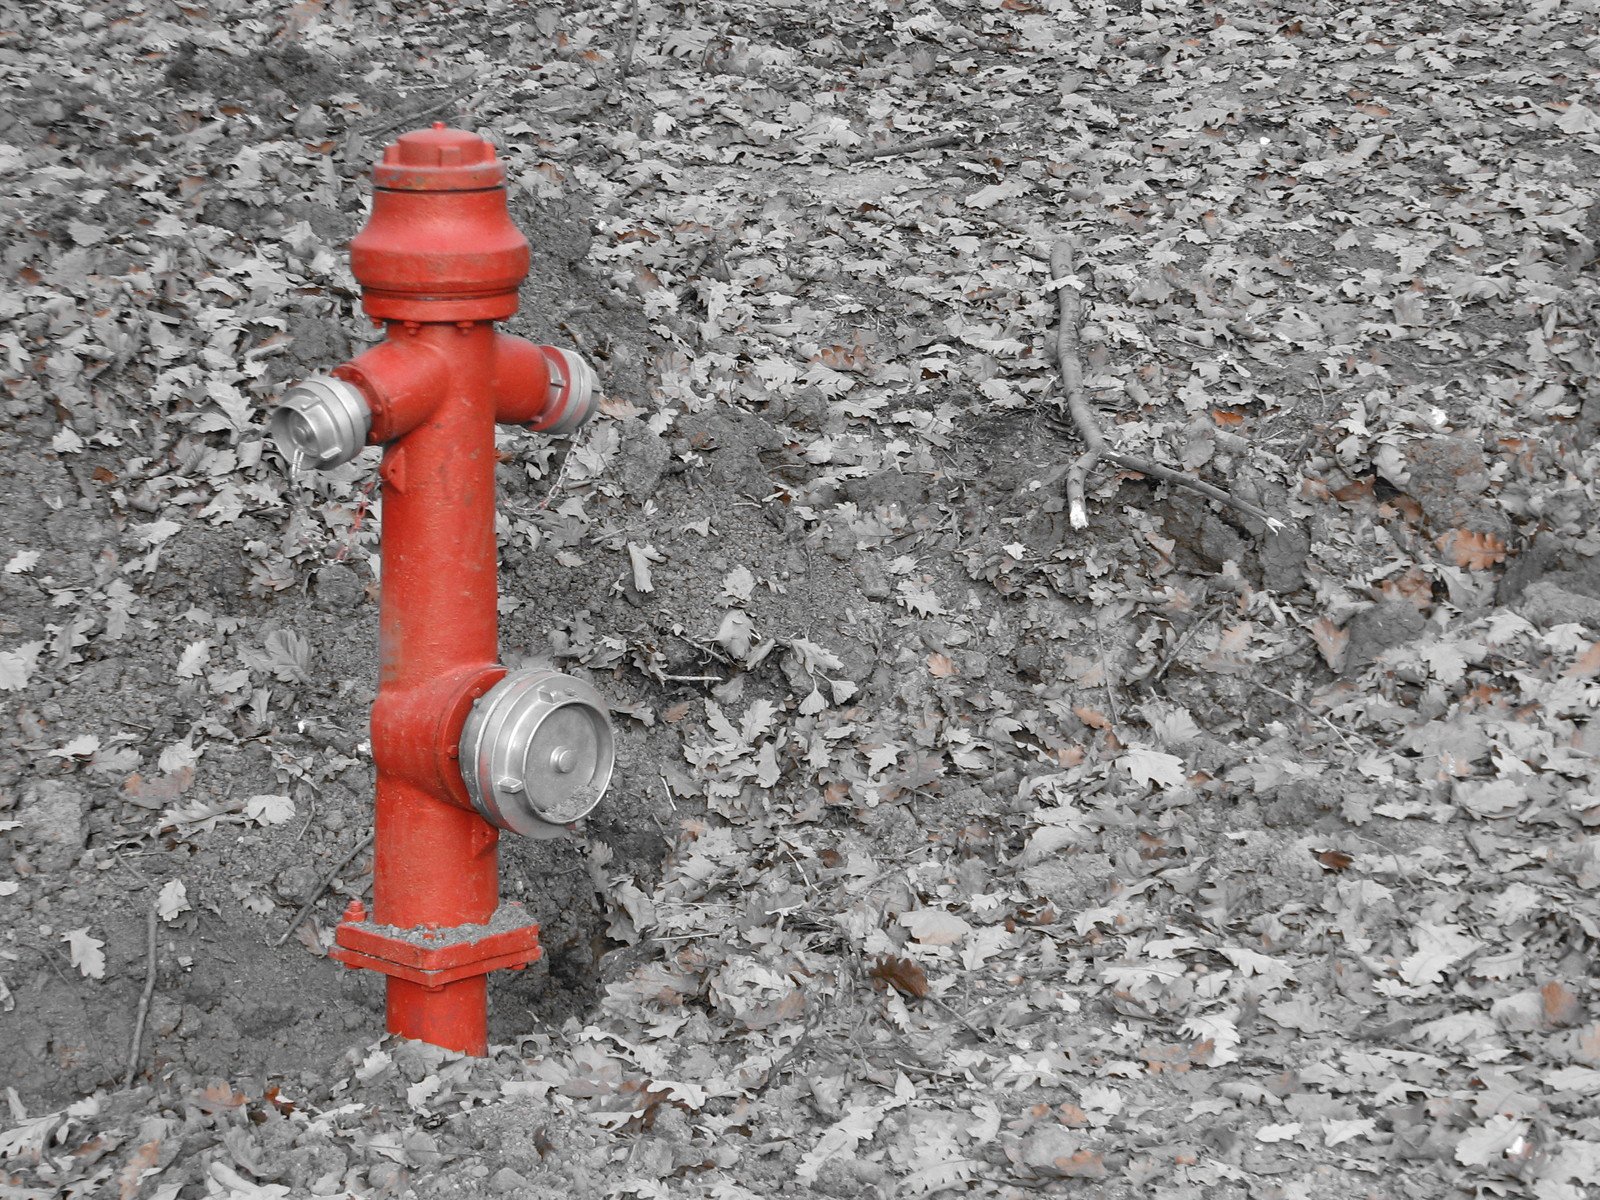 an image of a fire hydrant that is painted red